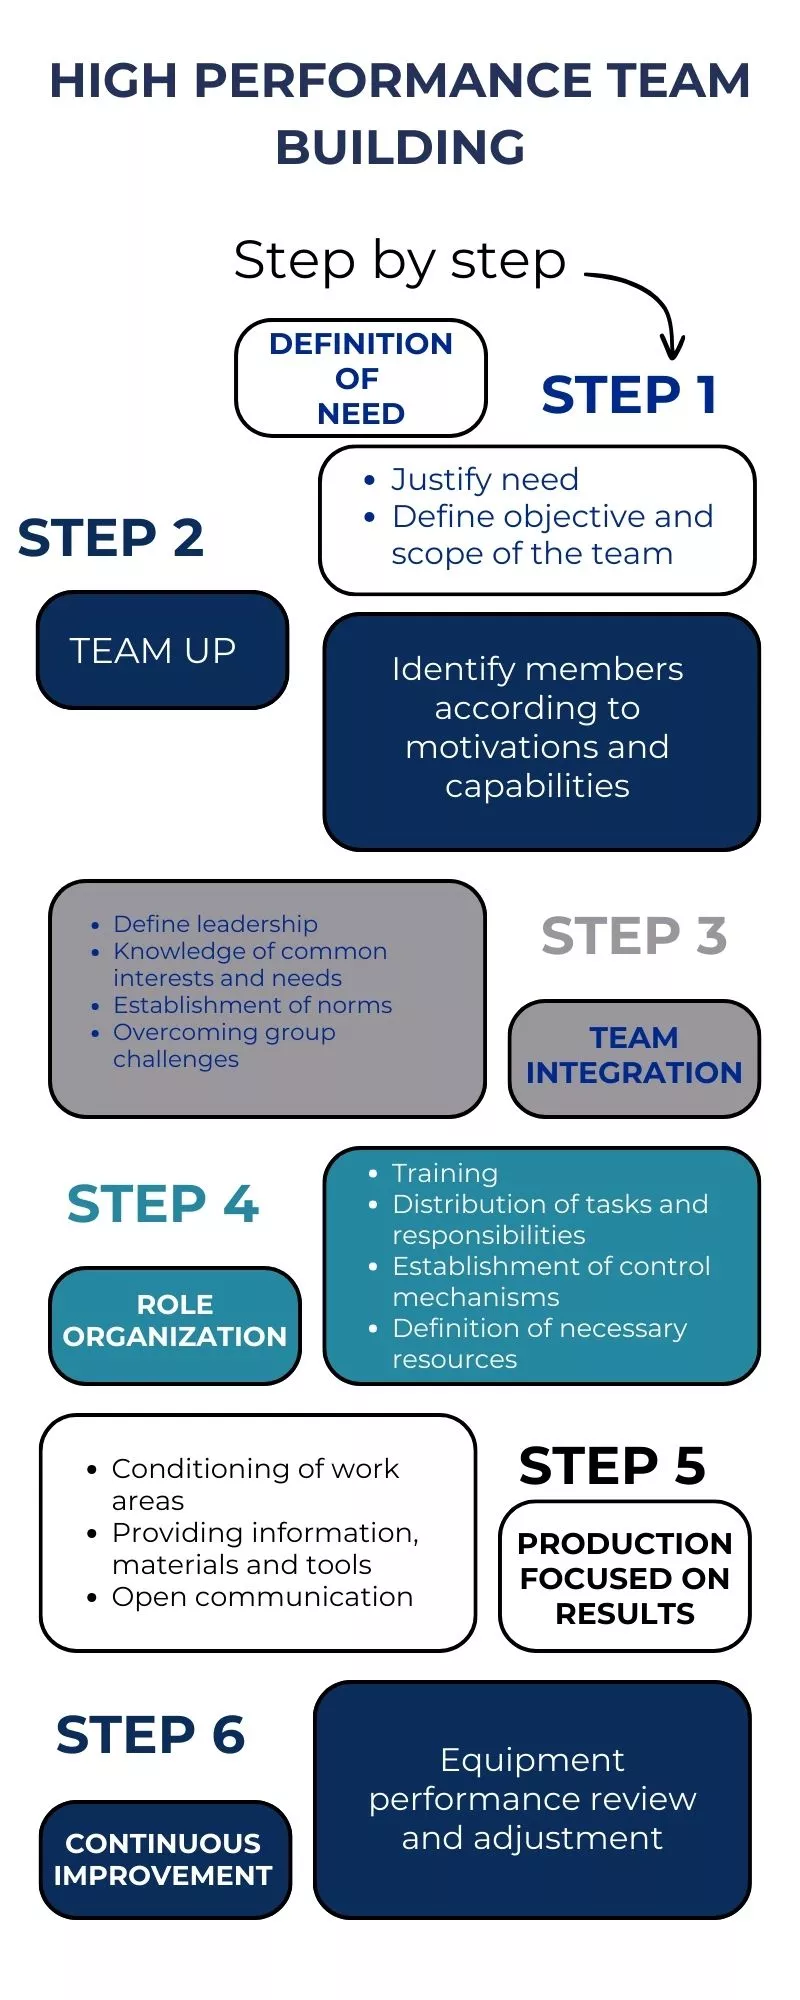 Steps for constructing high performance teams